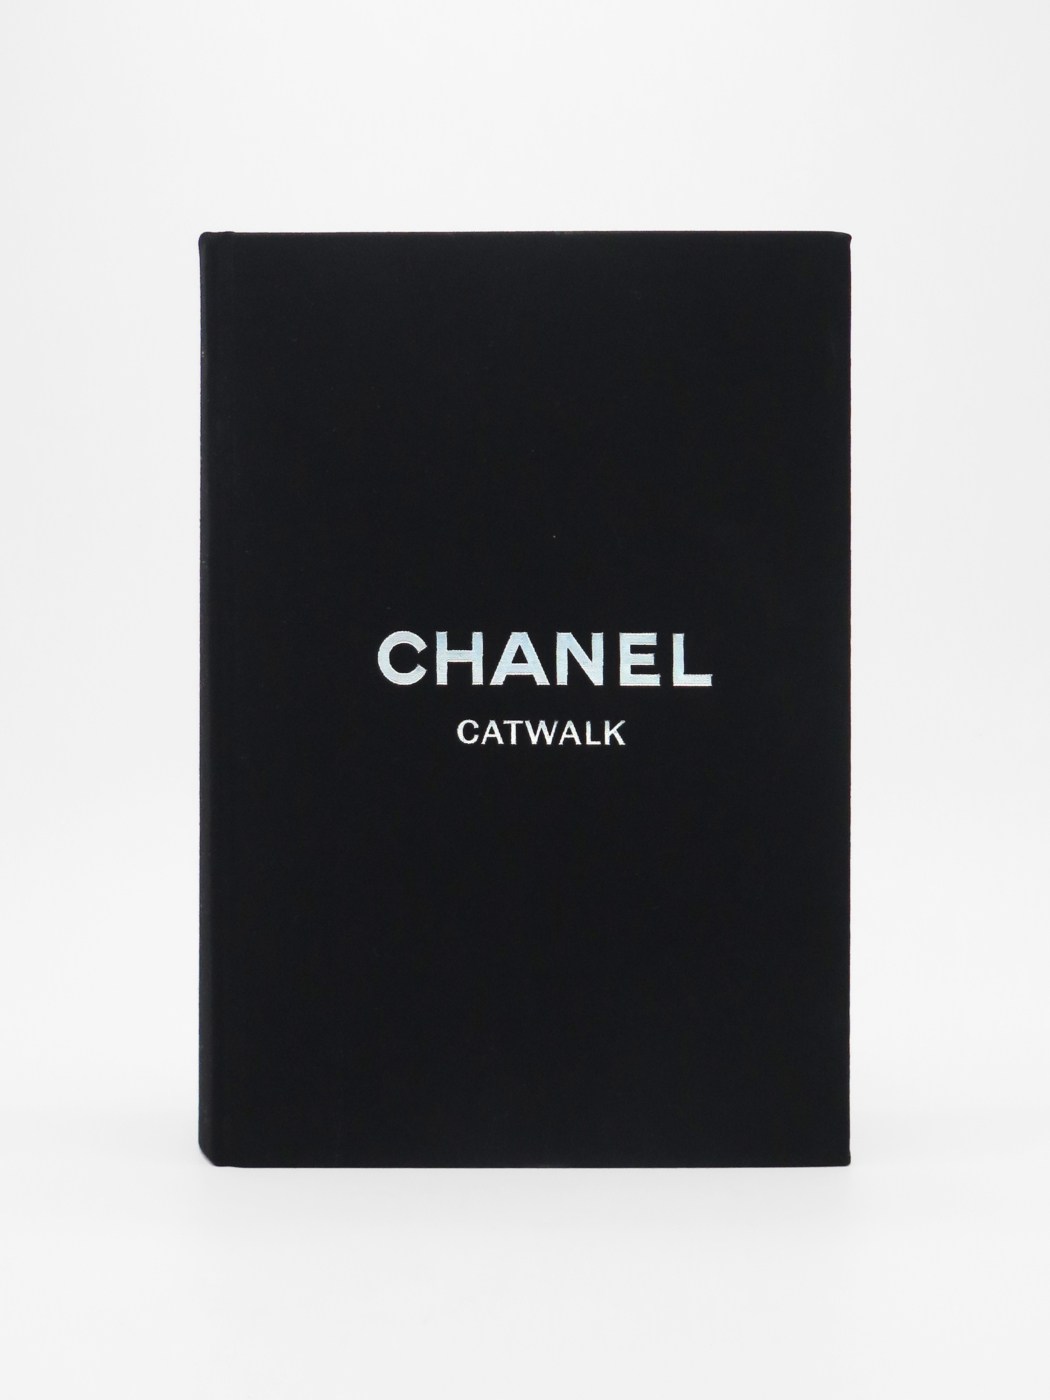 Chanel: The Complete Collections | KARMA Bookstore